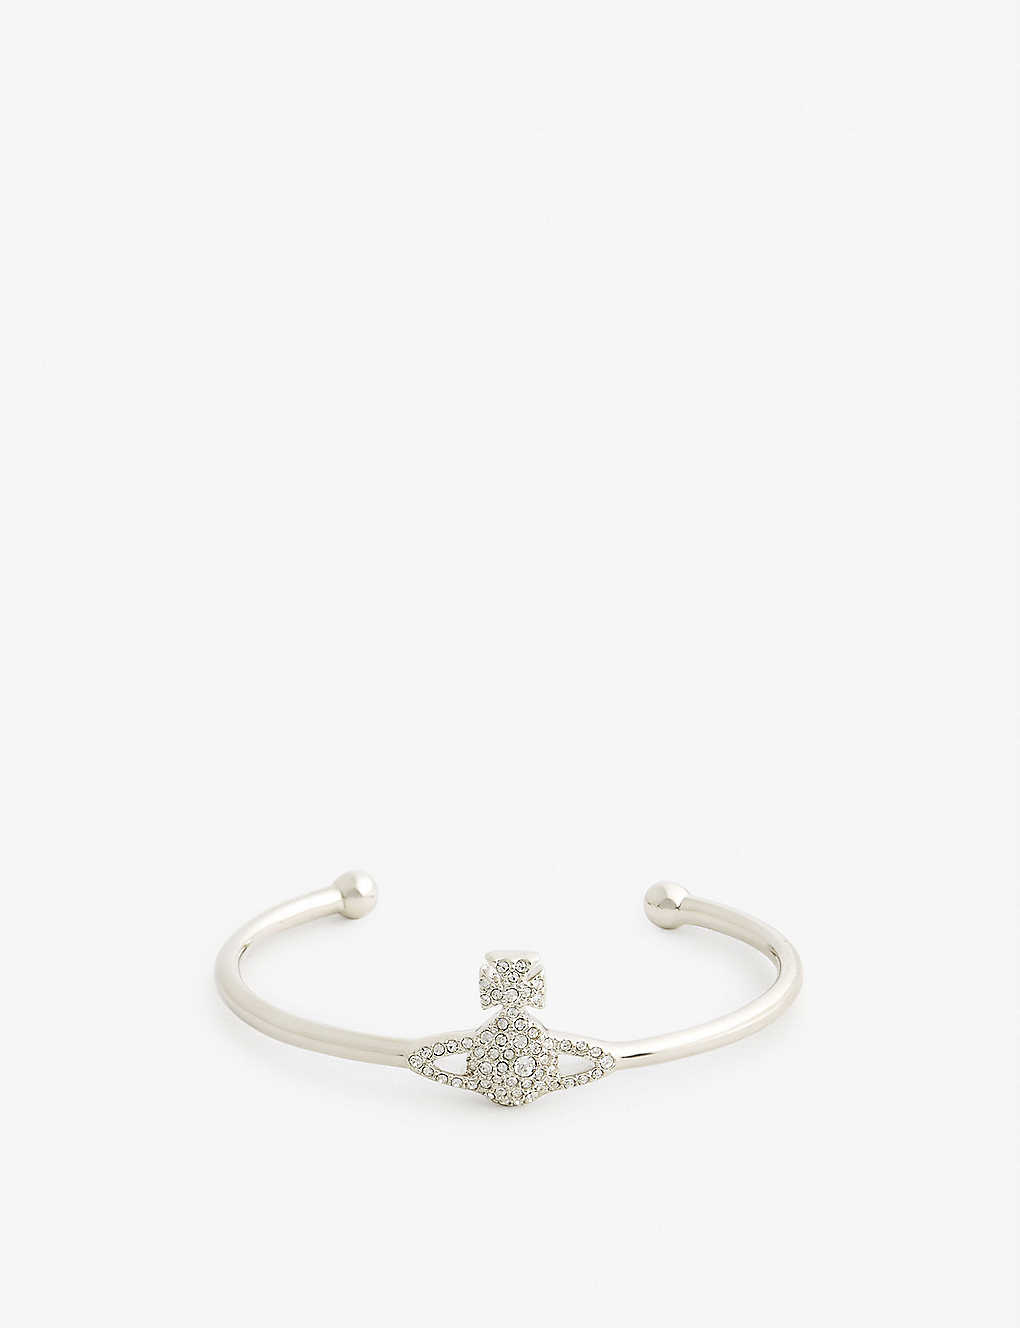 Vivienne Westwood Jewellery Grace Bas Relief Brass And Crystal Bangle Bracelet In Platinum/ Crystal